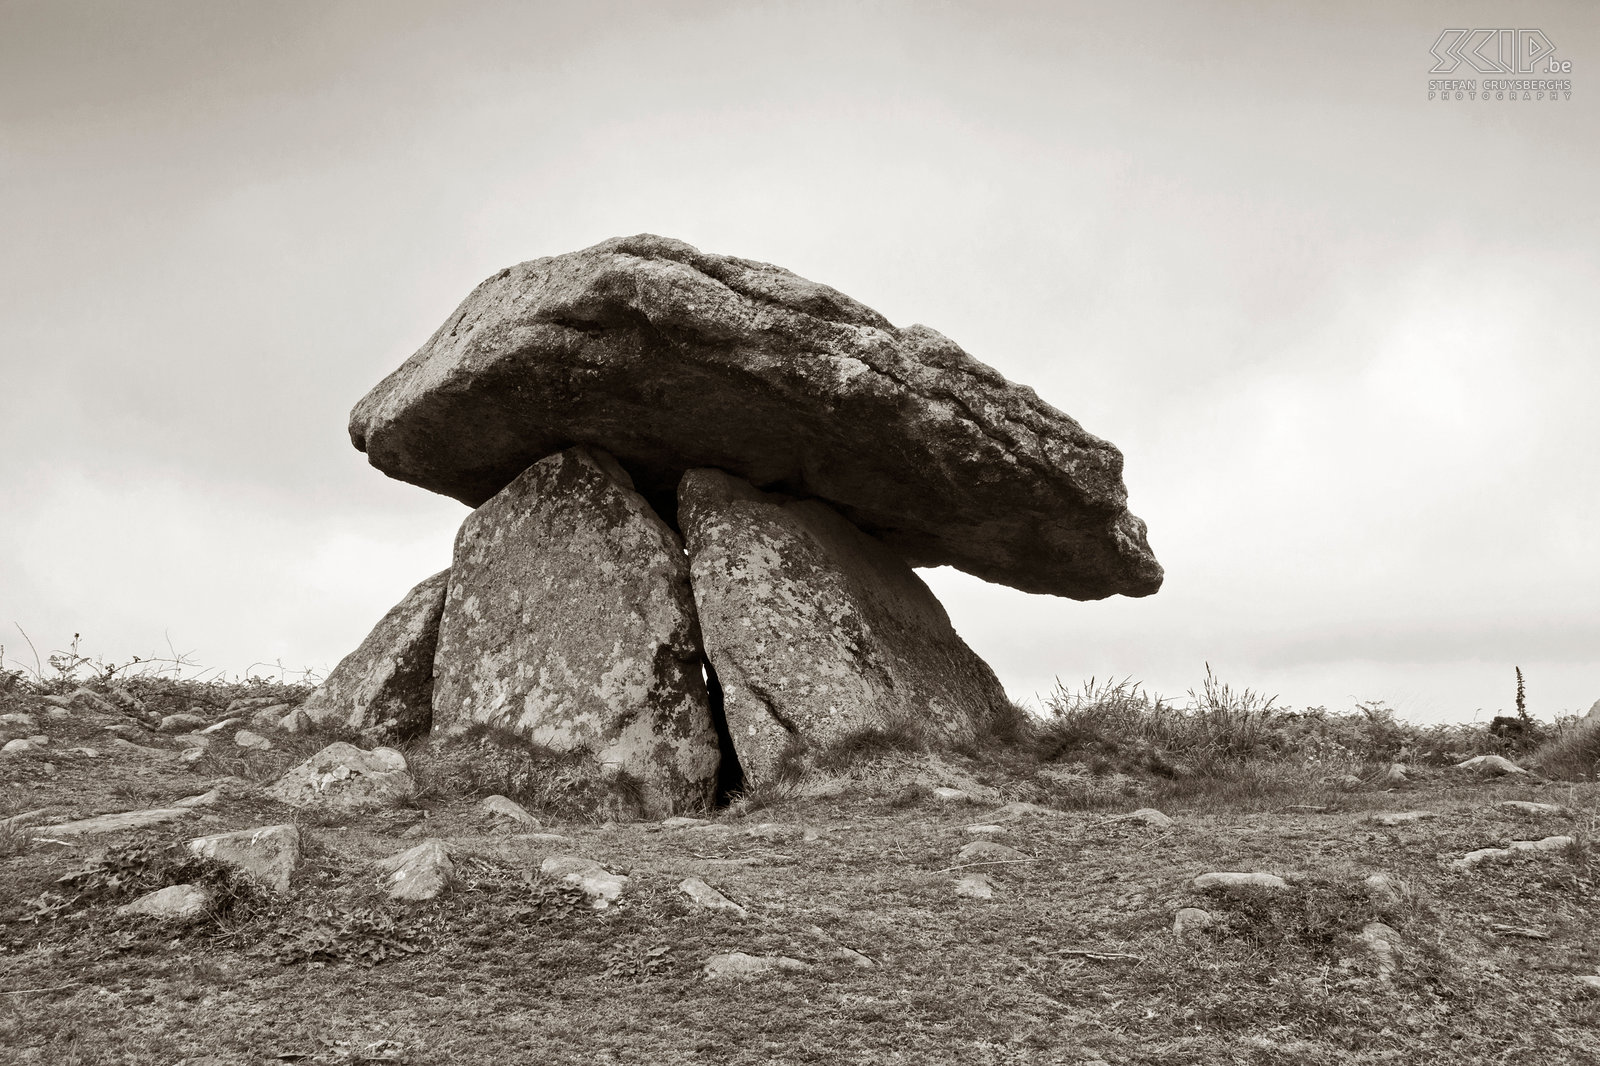 Chun Quoit Chûn Quoit is one of the best preserved megaliths of Cornwall. It is located on a hill and surrounded by heather moorland and the sea.  The mushroom-domed capstone  was a closed burial chamber which is believed to have been built around 2400BC. Stefan Cruysberghs